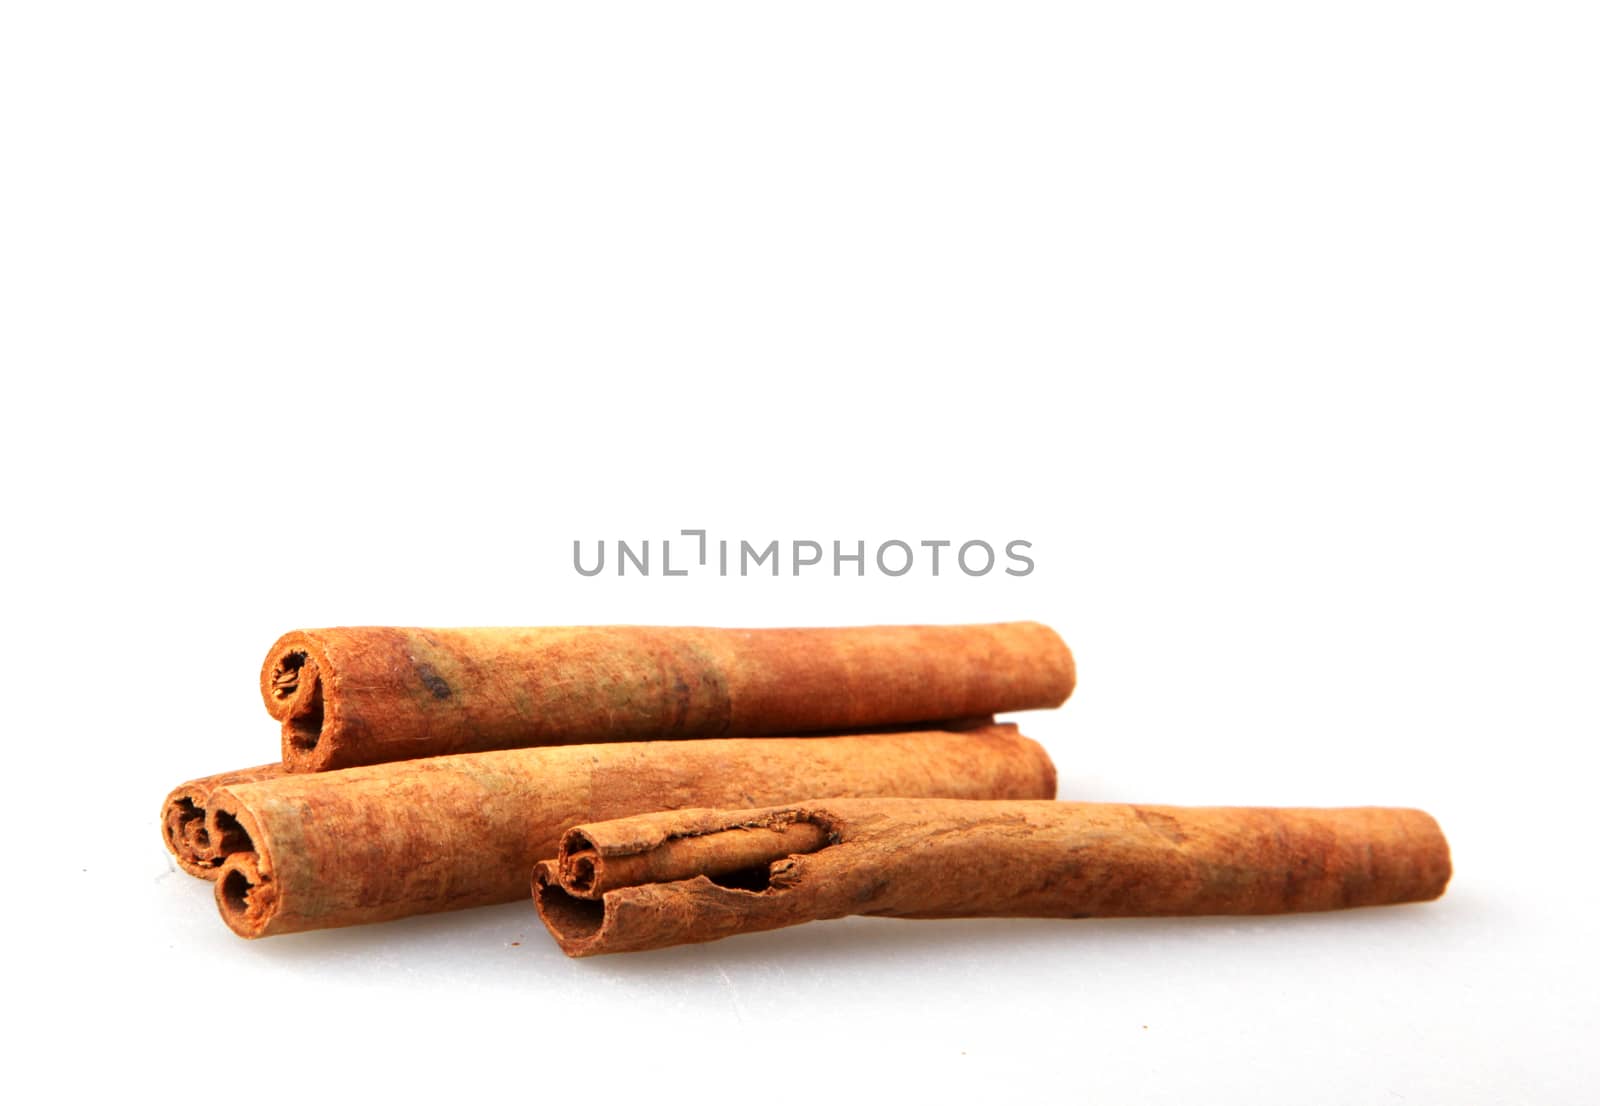 Cinnamon Sticks Isolated On White Background by nenovbrothers